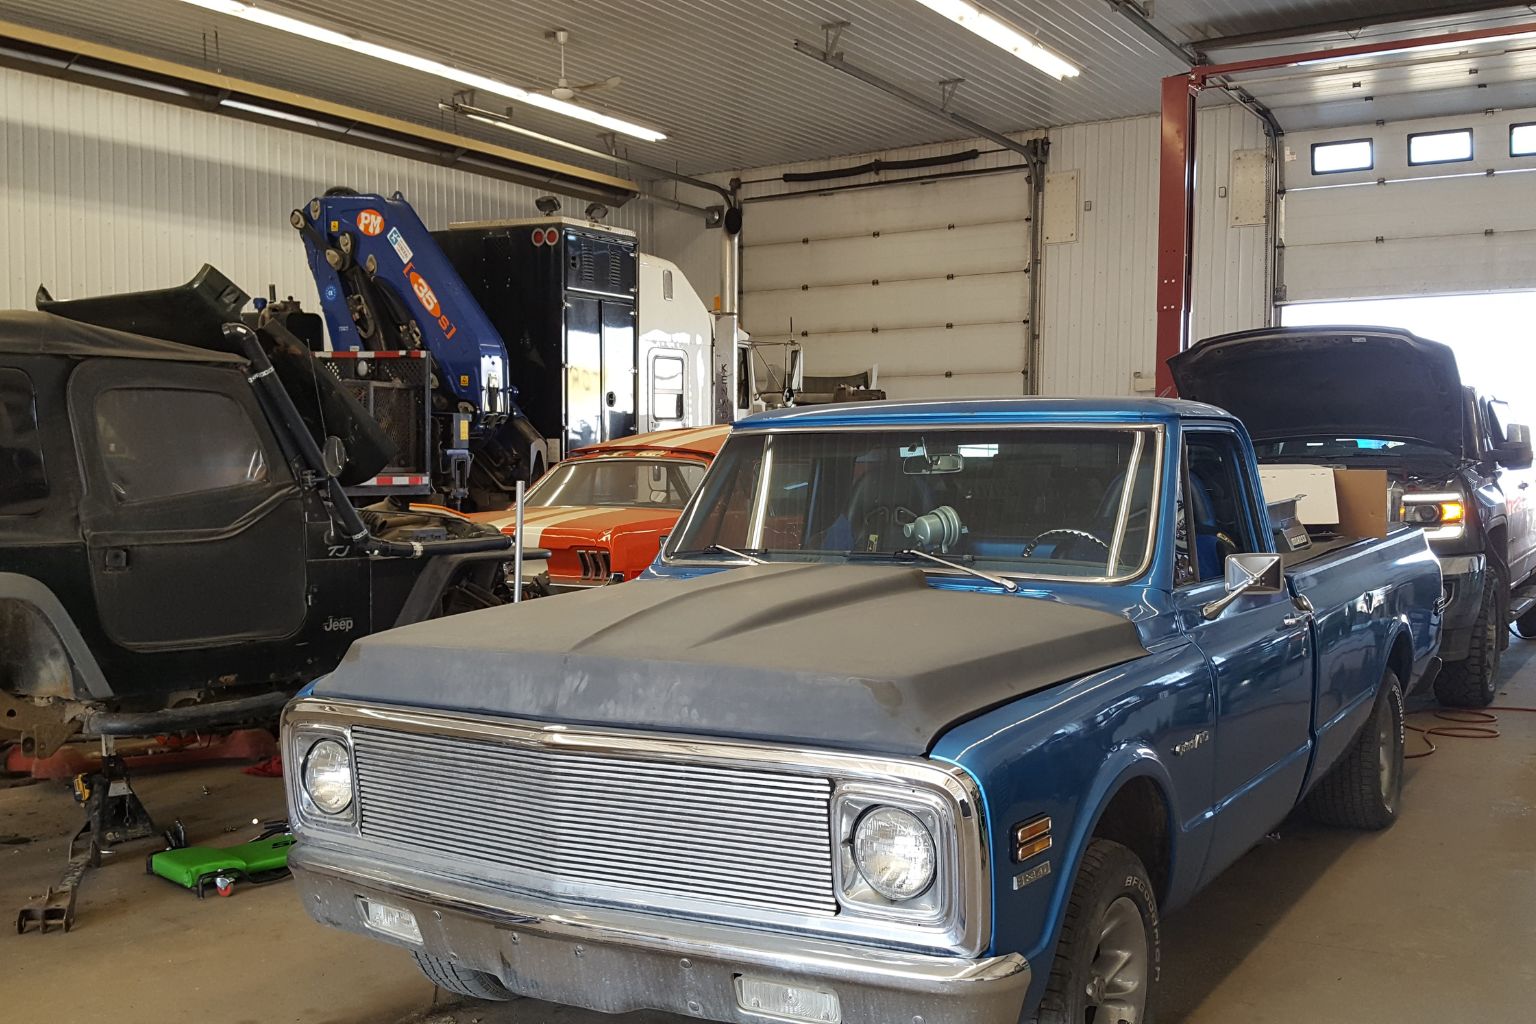 Classic Truck Being Worked On